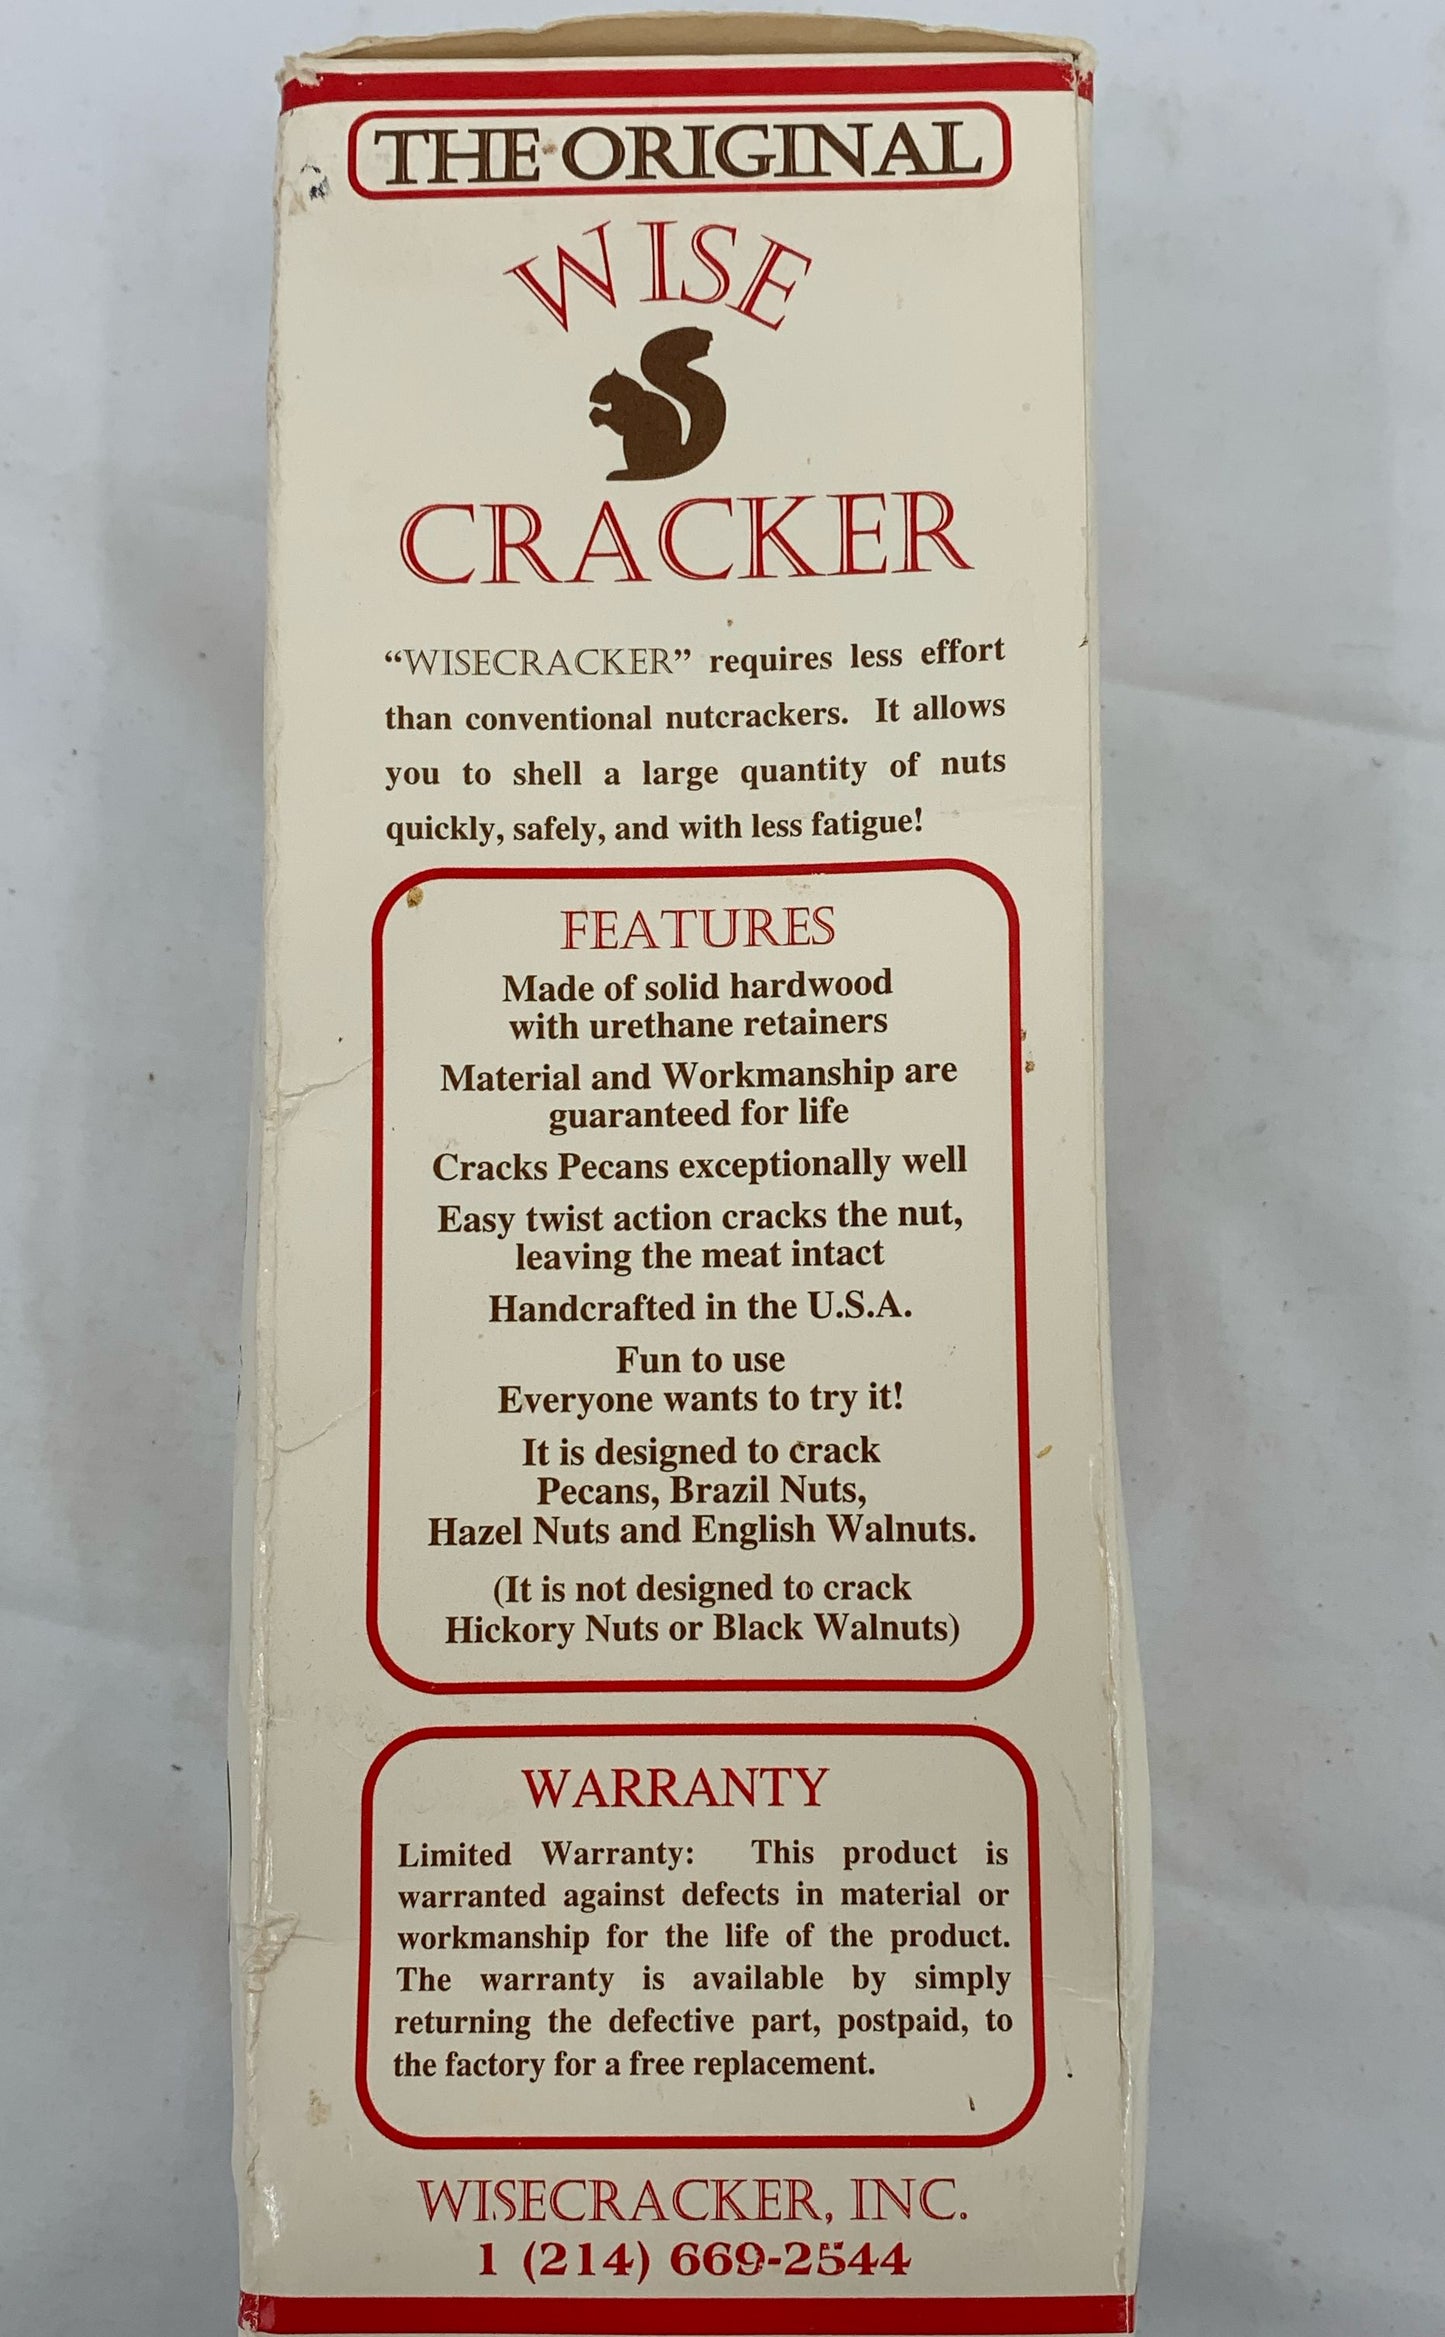 The Original Wise Cracker Pecan Nut Cracker Handcrafted In The U.S.A.